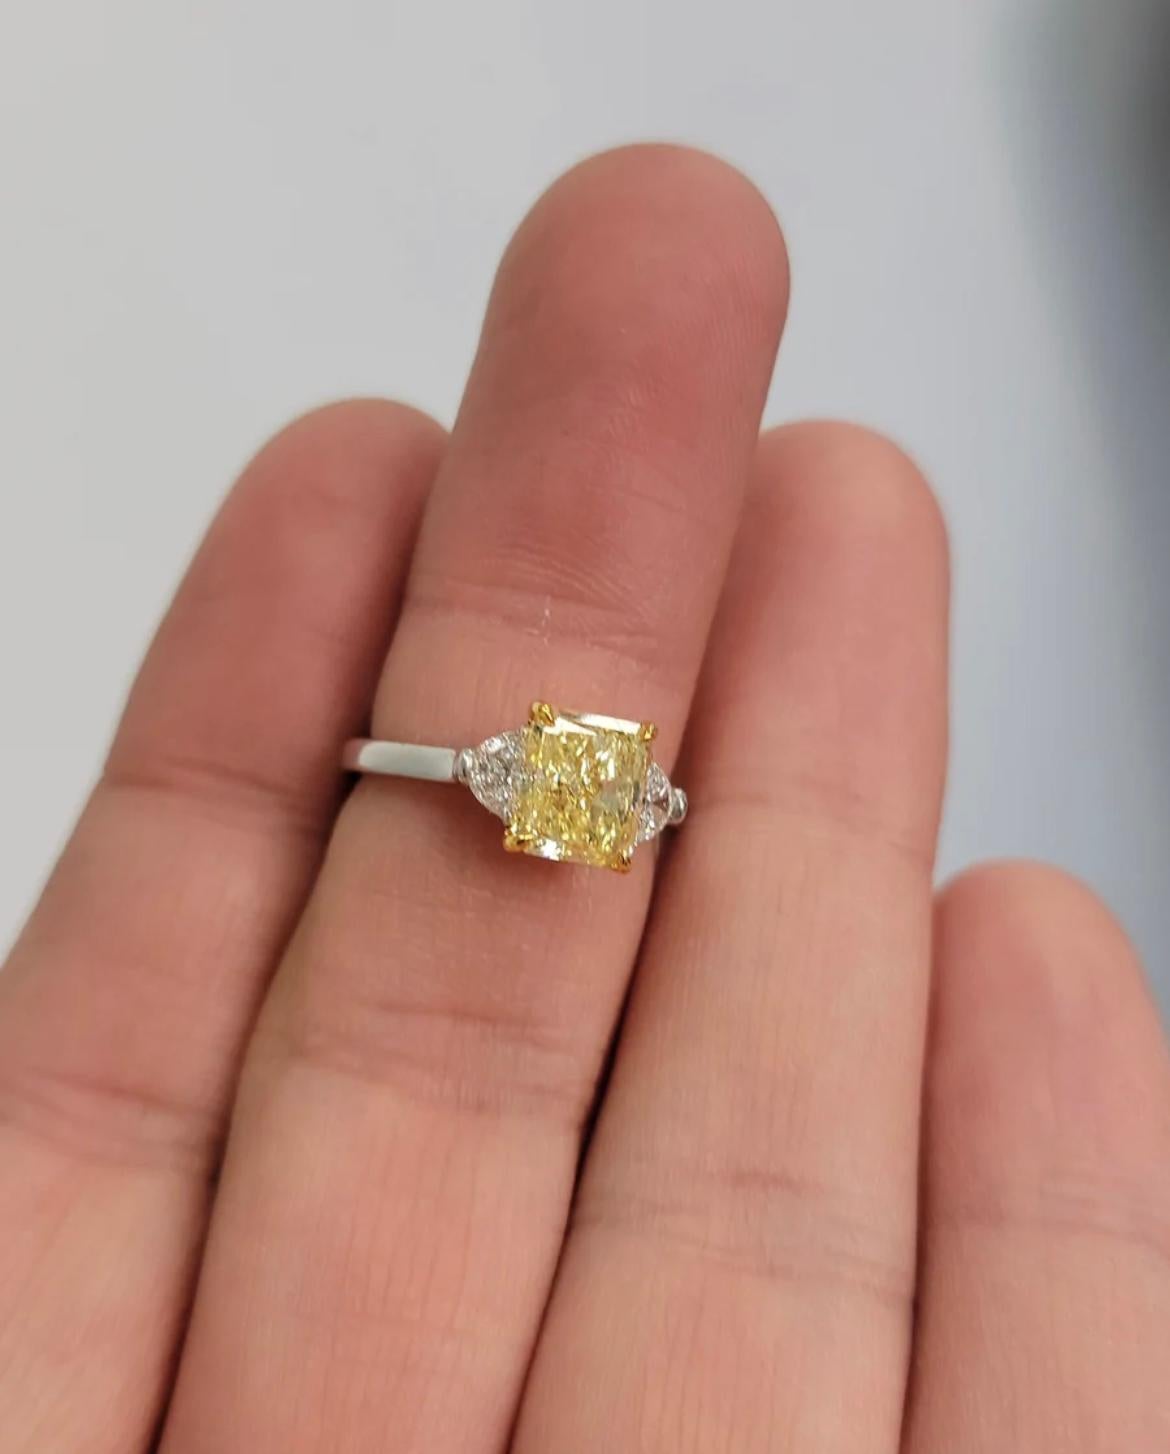 Radiant Cut 2.14ct Fancy Yellow Radiant VS2 GIA Ring For Sale